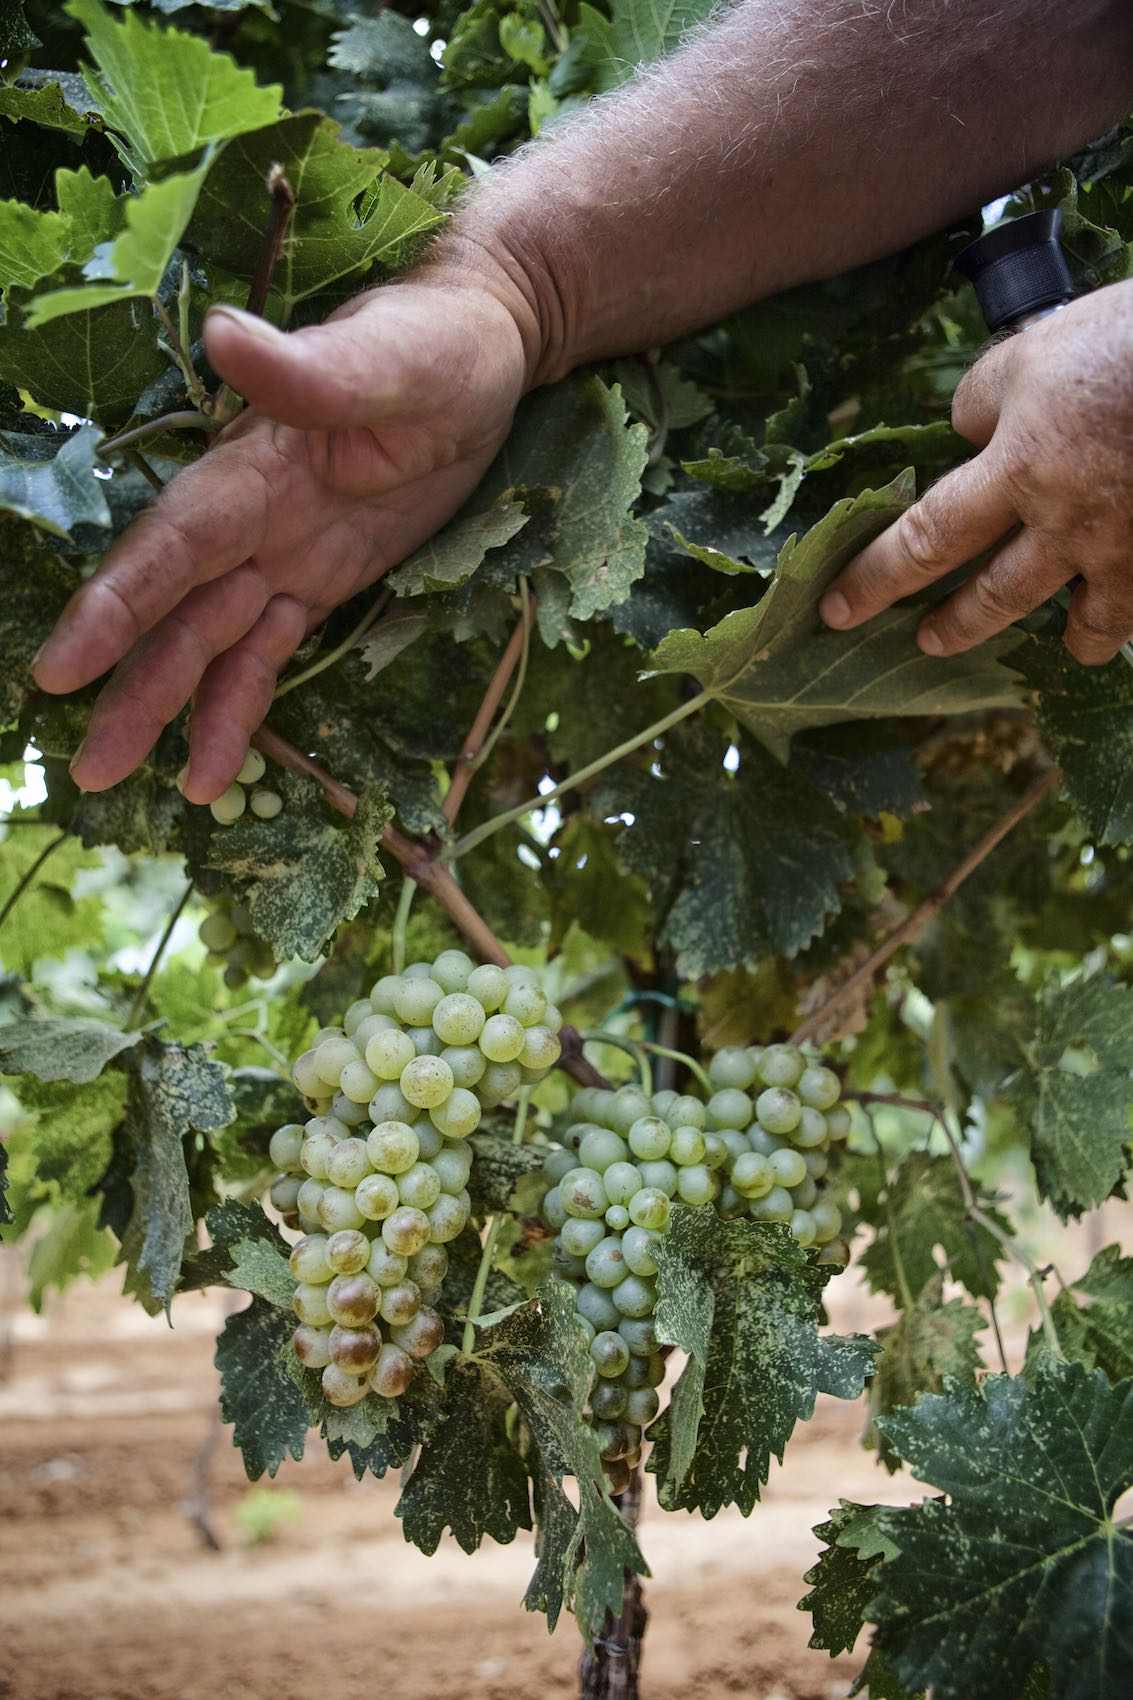 Jody Horton Photography - Hands uncovering white grape clusters on the vine.